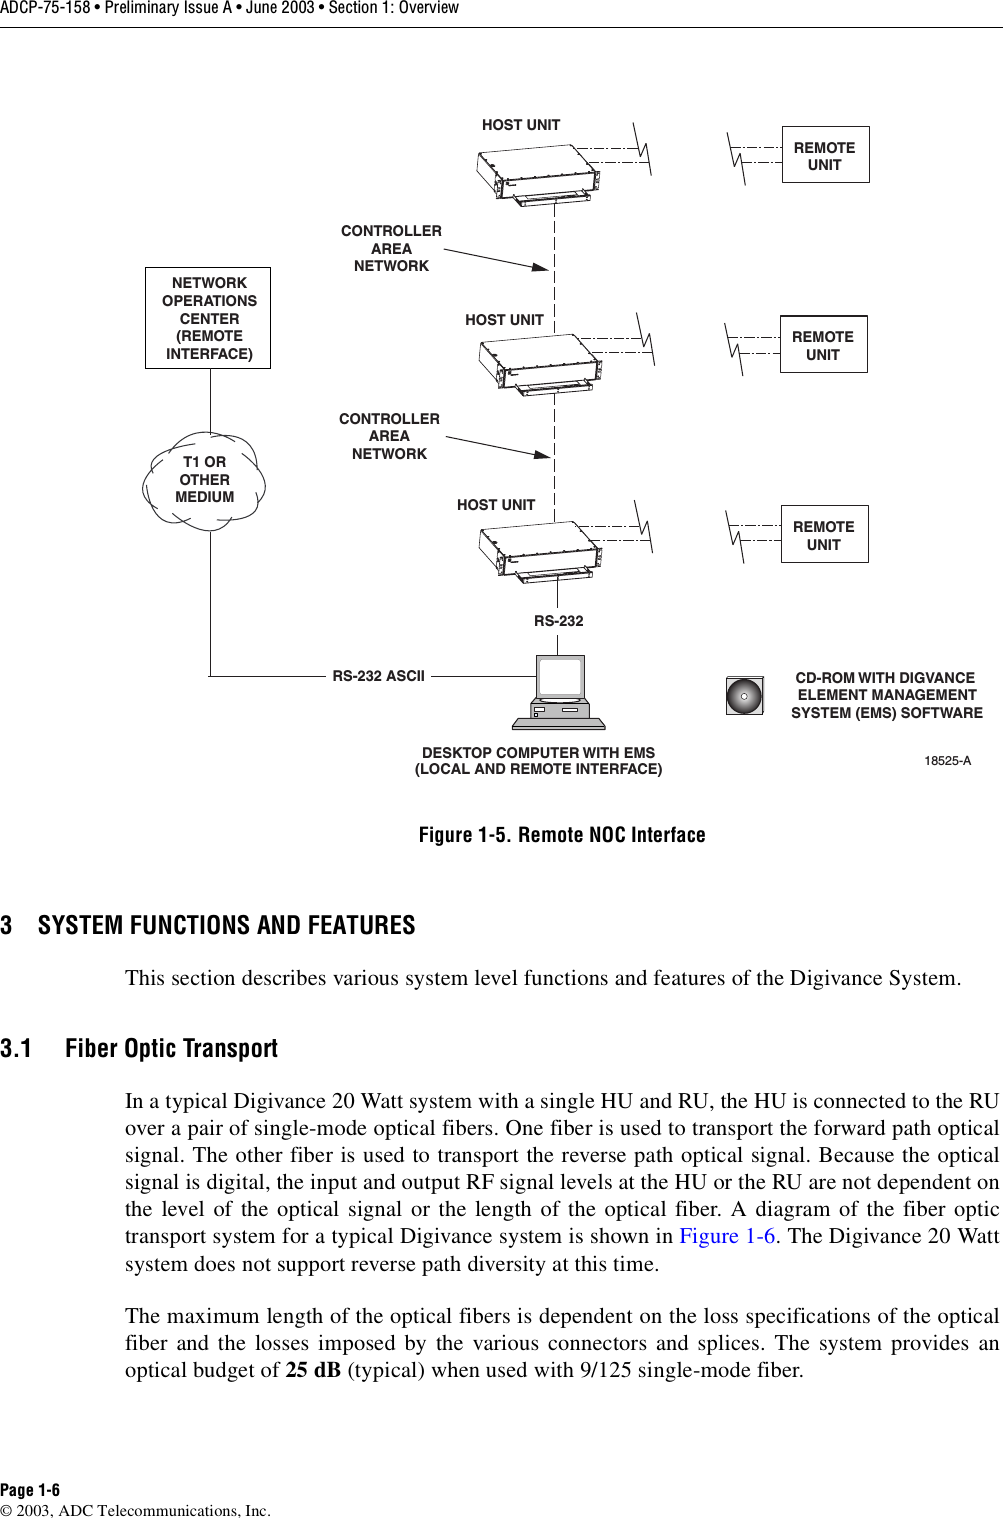 ADCP-75-158 • Preliminary Issue A • June 2003 • Section 1: OverviewPage 1-6© 2003, ADC Telecommunications, Inc.Figure 1-5. Remote NOC Interface3 SYSTEM FUNCTIONS AND FEATURESThis section describes various system level functions and features of the Digivance System. 3.1 Fiber Optic TransportIn a typical Digivance 20 Watt system with a single HU and RU, the HU is connected to the RUover a pair of single-mode optical fibers. One fiber is used to transport the forward path opticalsignal. The other fiber is used to transport the reverse path optical signal. Because the opticalsignal is digital, the input and output RF signal levels at the HU or the RU are not dependent onthe level of the optical signal or the length of the optical fiber. A diagram of the fiber optictransport system for a typical Digivance system is shown in Figure 1-6. The Digivance 20 Wattsystem does not support reverse path diversity at this time. The maximum length of the optical fibers is dependent on the loss specifications of the opticalfiber and the losses imposed by the various connectors and splices. The system provides anoptical budget of 25 dB (typical) when used with 9/125 single-mode fiber. DESKTOP COMPUTER WITH EMS(LOCAL AND REMOTE INTERFACE)HOST UNITHOST UNITHOST UNITNETWORKOPERATIONSCENTER(REMOTEINTERFACE)T1 OROTHERMEDIUMCONTROLLERAREANETWORKCONTROLLERAREANETWORKRS-232 ASCIIRS-23218525-ACD-ROM WITH DIGVANCE ELEMENT MANAGEMENTSYSTEM (EMS) SOFTWAREREMOTEUNITREMOTEUNITREMOTEUNIT